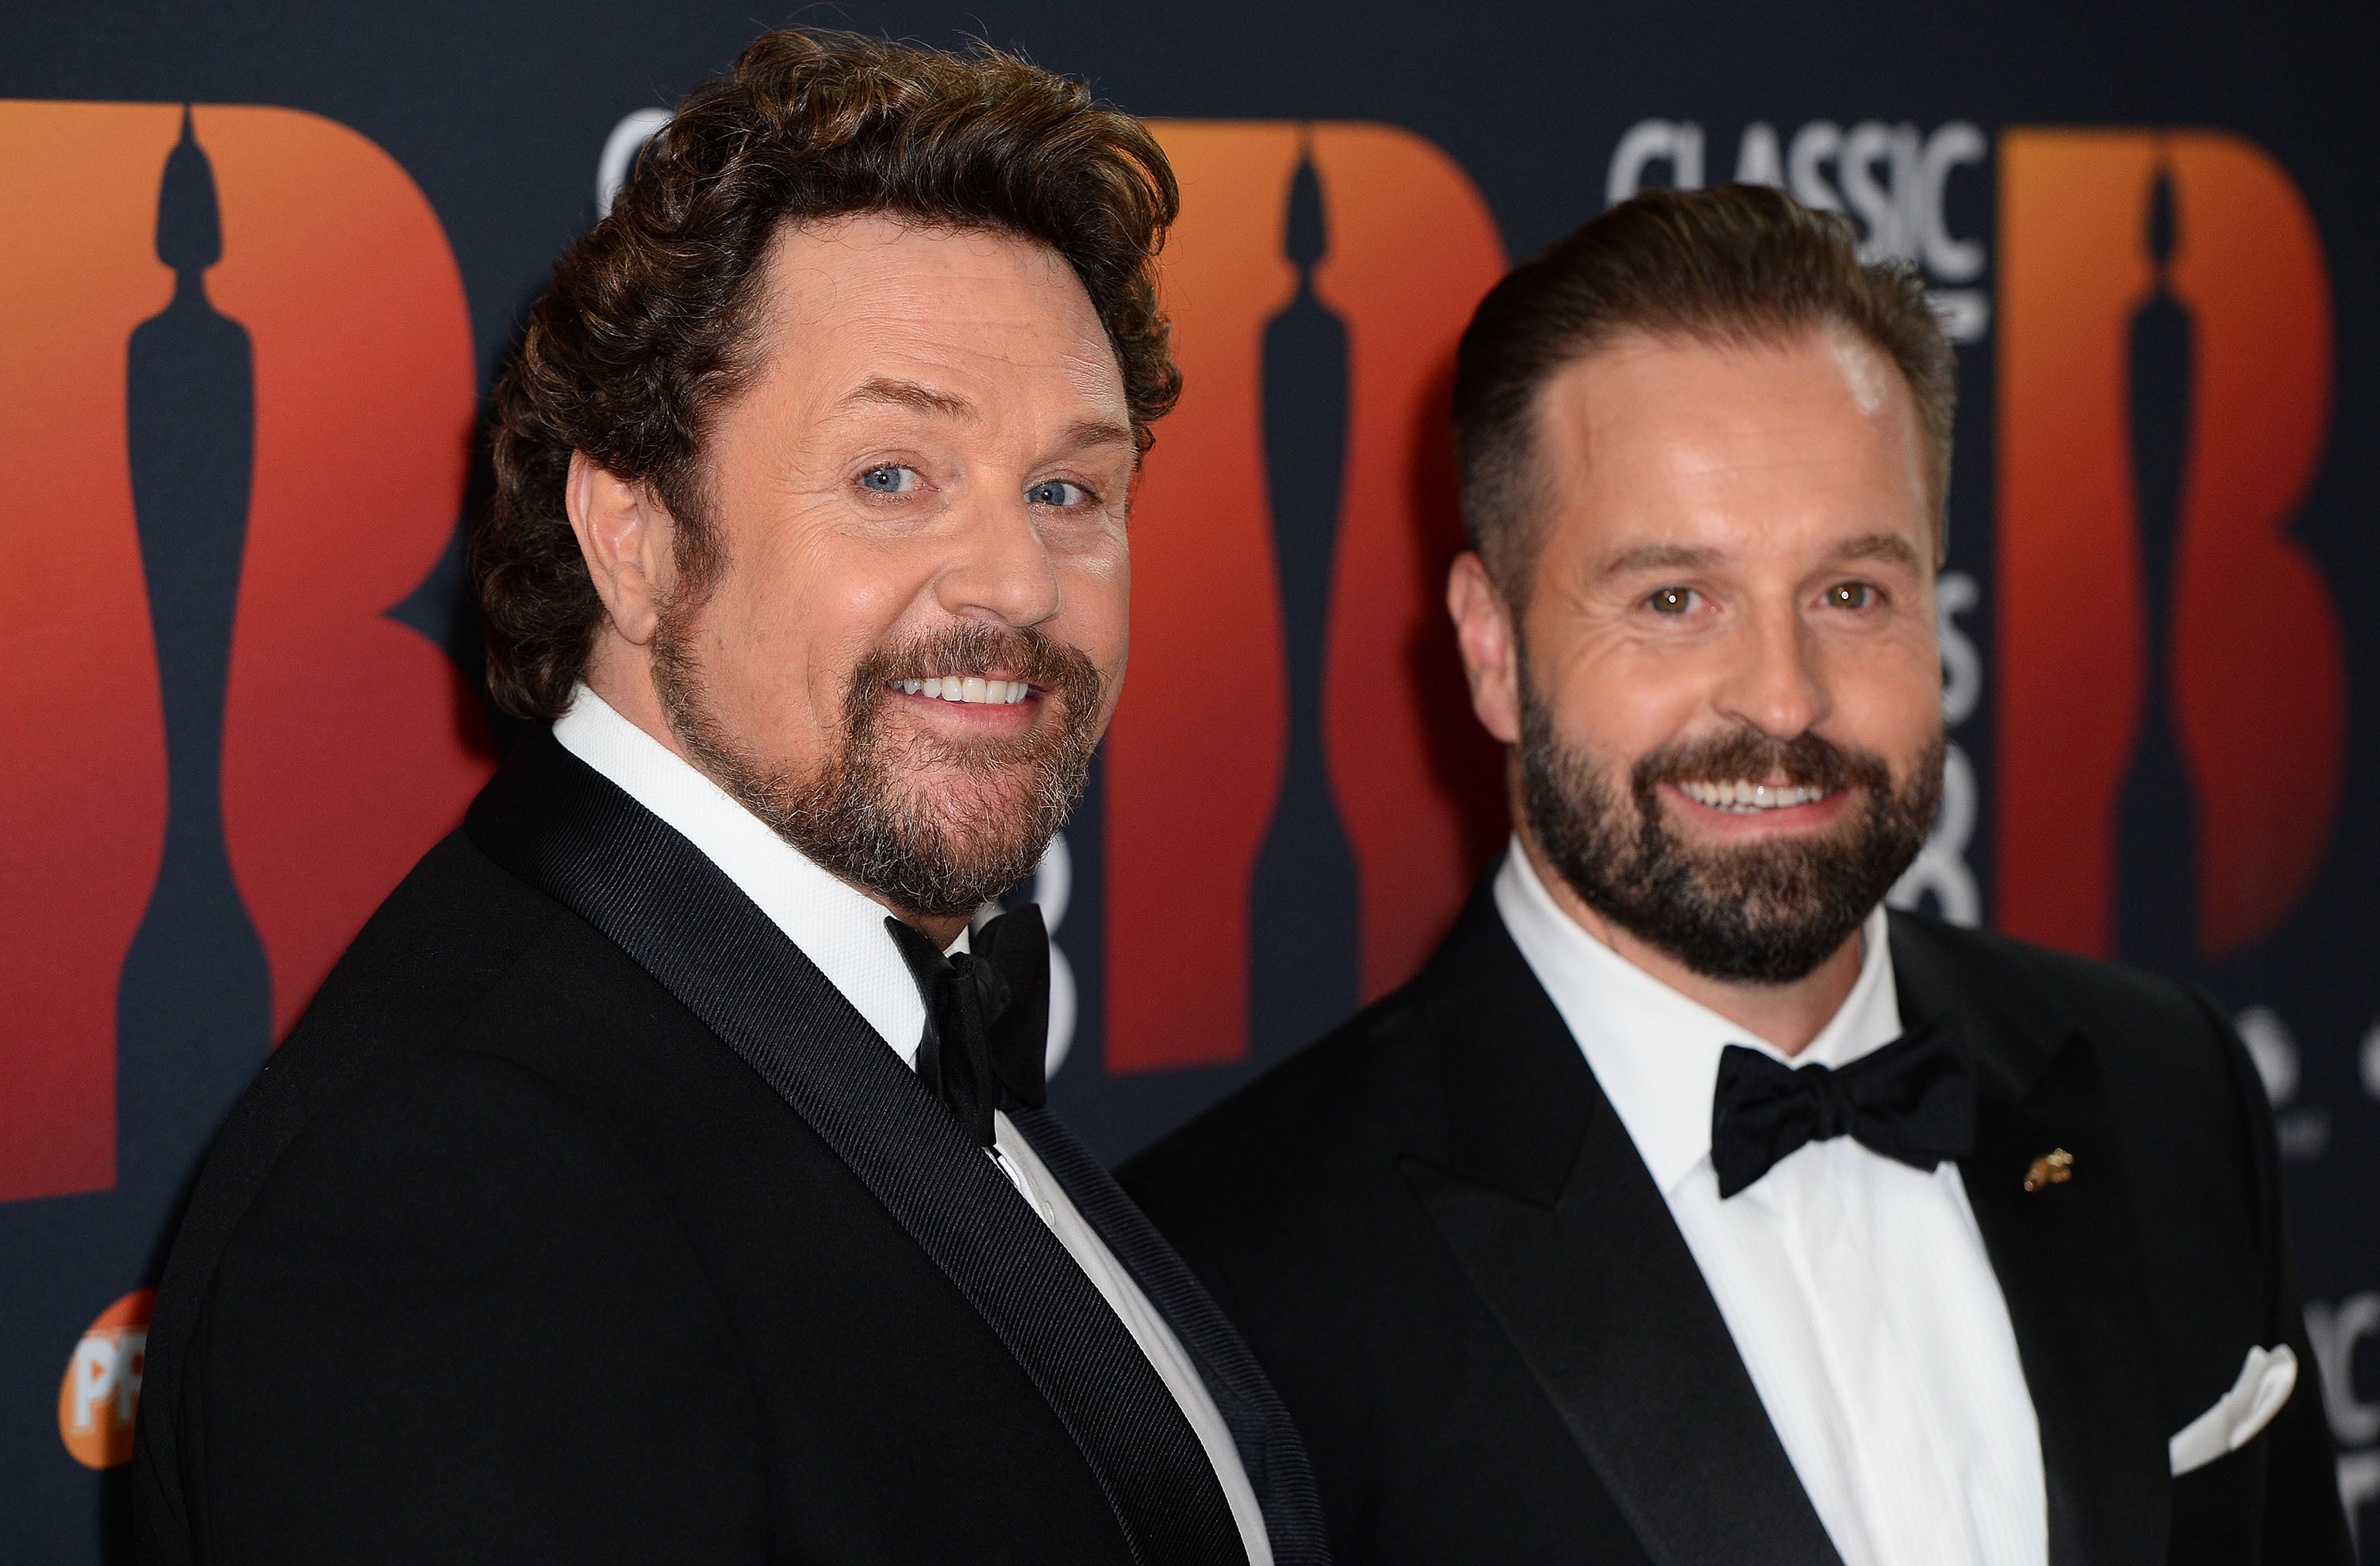 Michael Ball spoke about his life and career while being interviewed alongside collaborator Alfie Boe